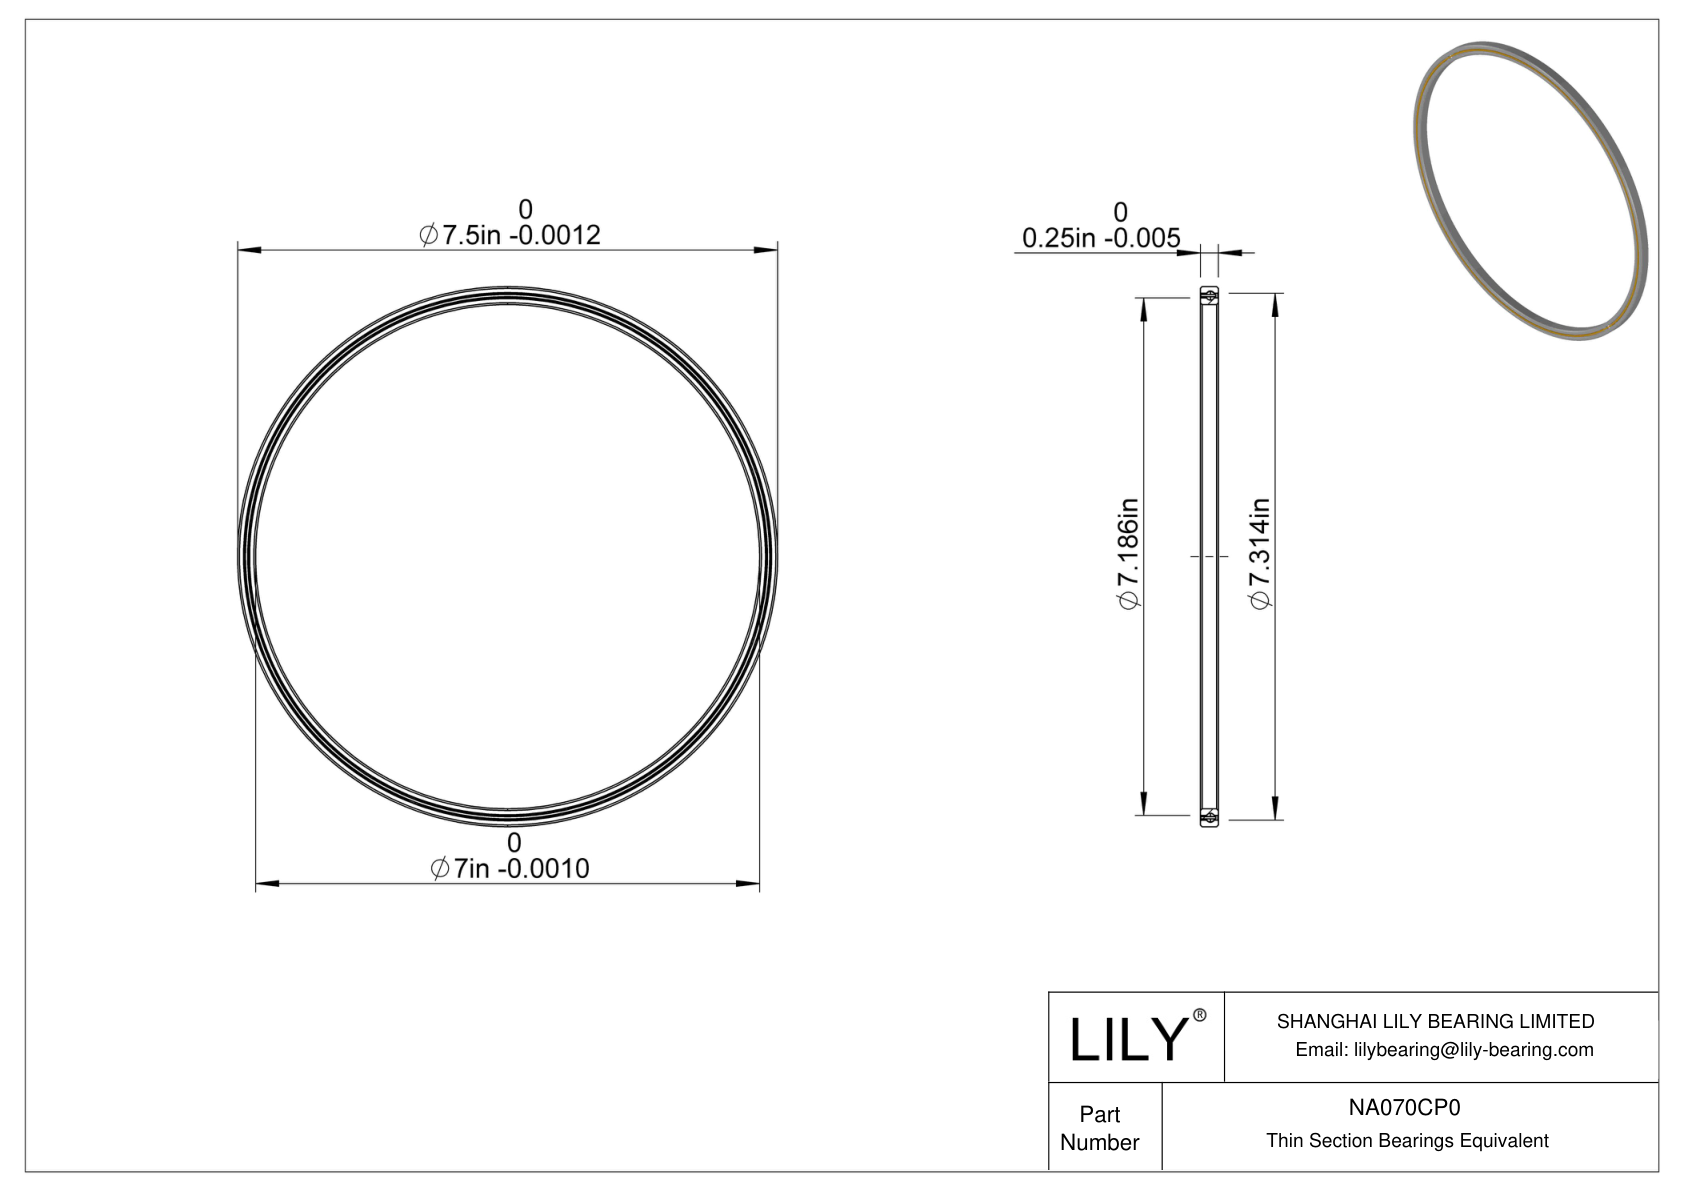 NA070CP0 Constant Section (CS) Bearings cad drawing